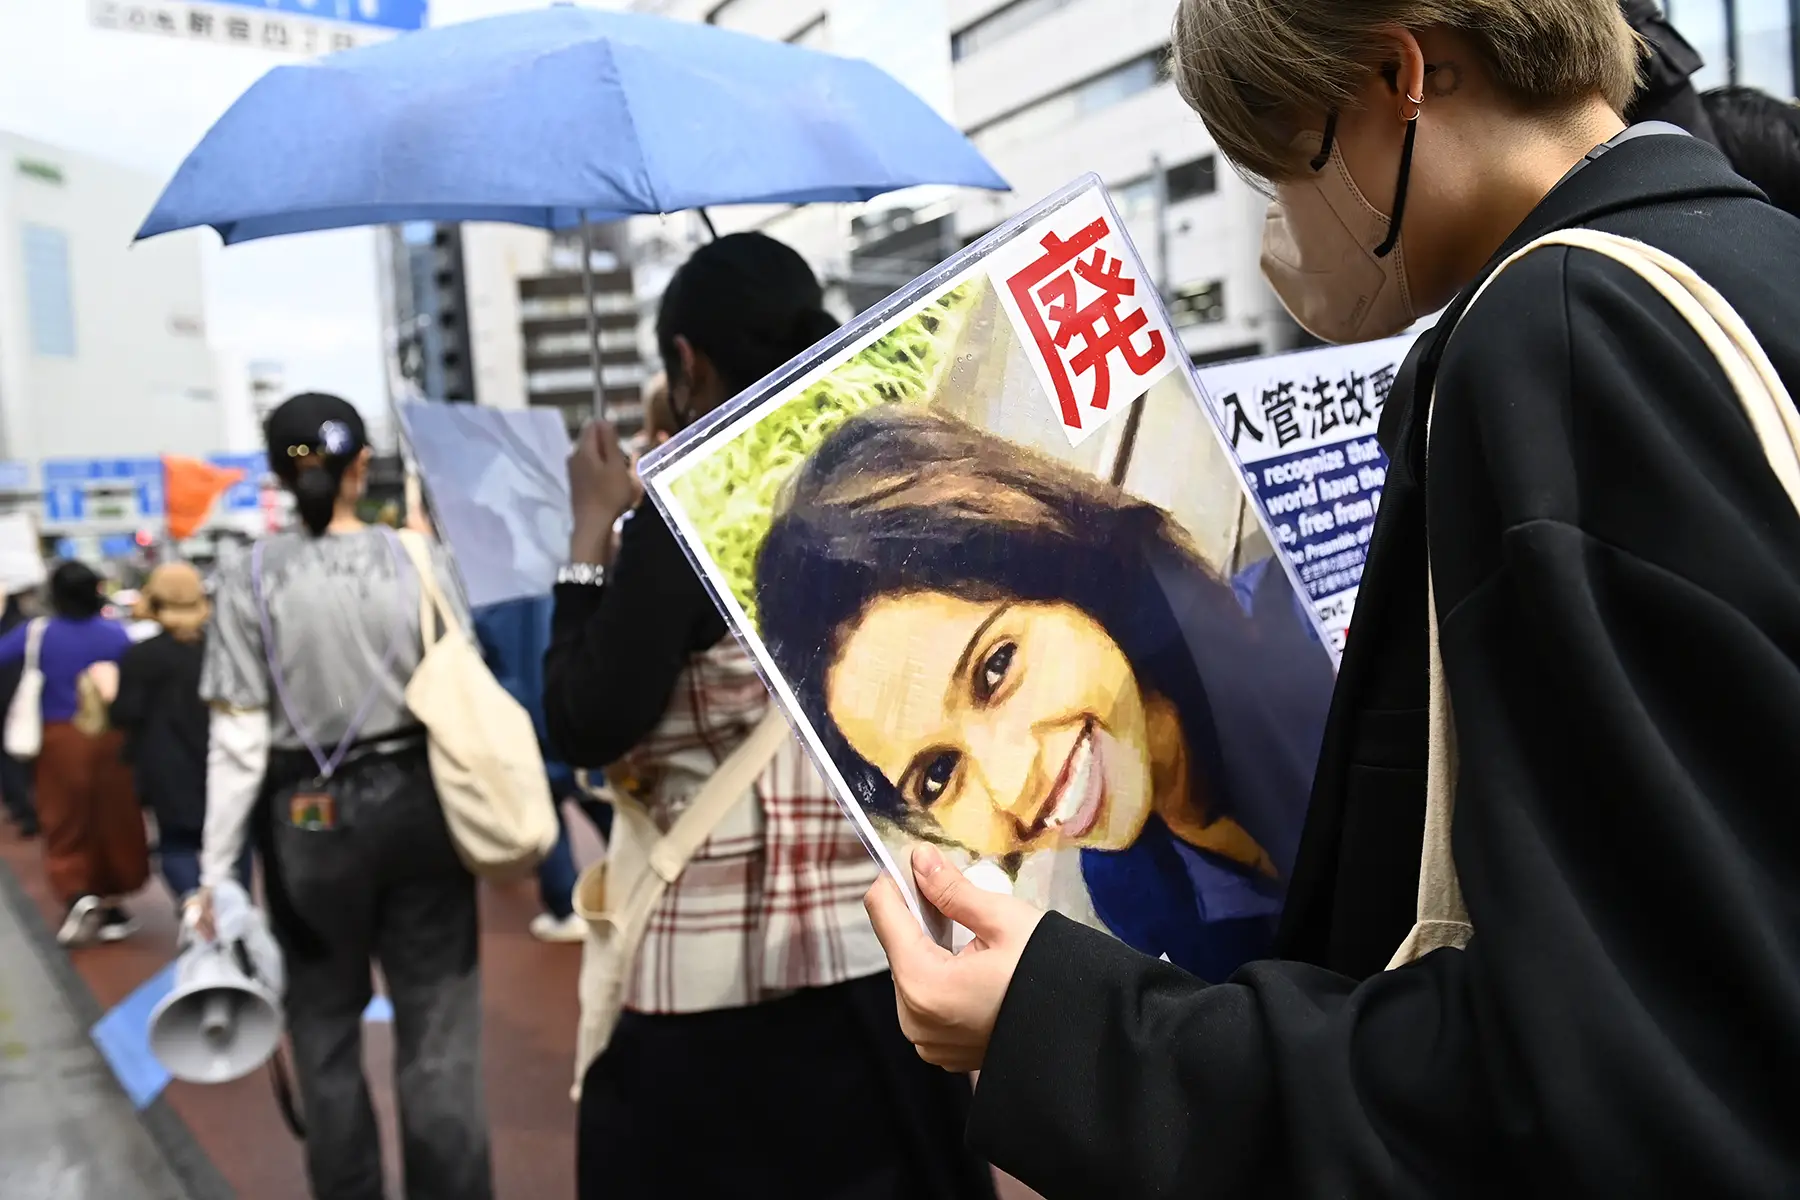 Closeup of the back of a woman holding a photograph at a protest. The photo shows a Sri Lankan woman, Rathnayake Lianage Wishma Sandamali.